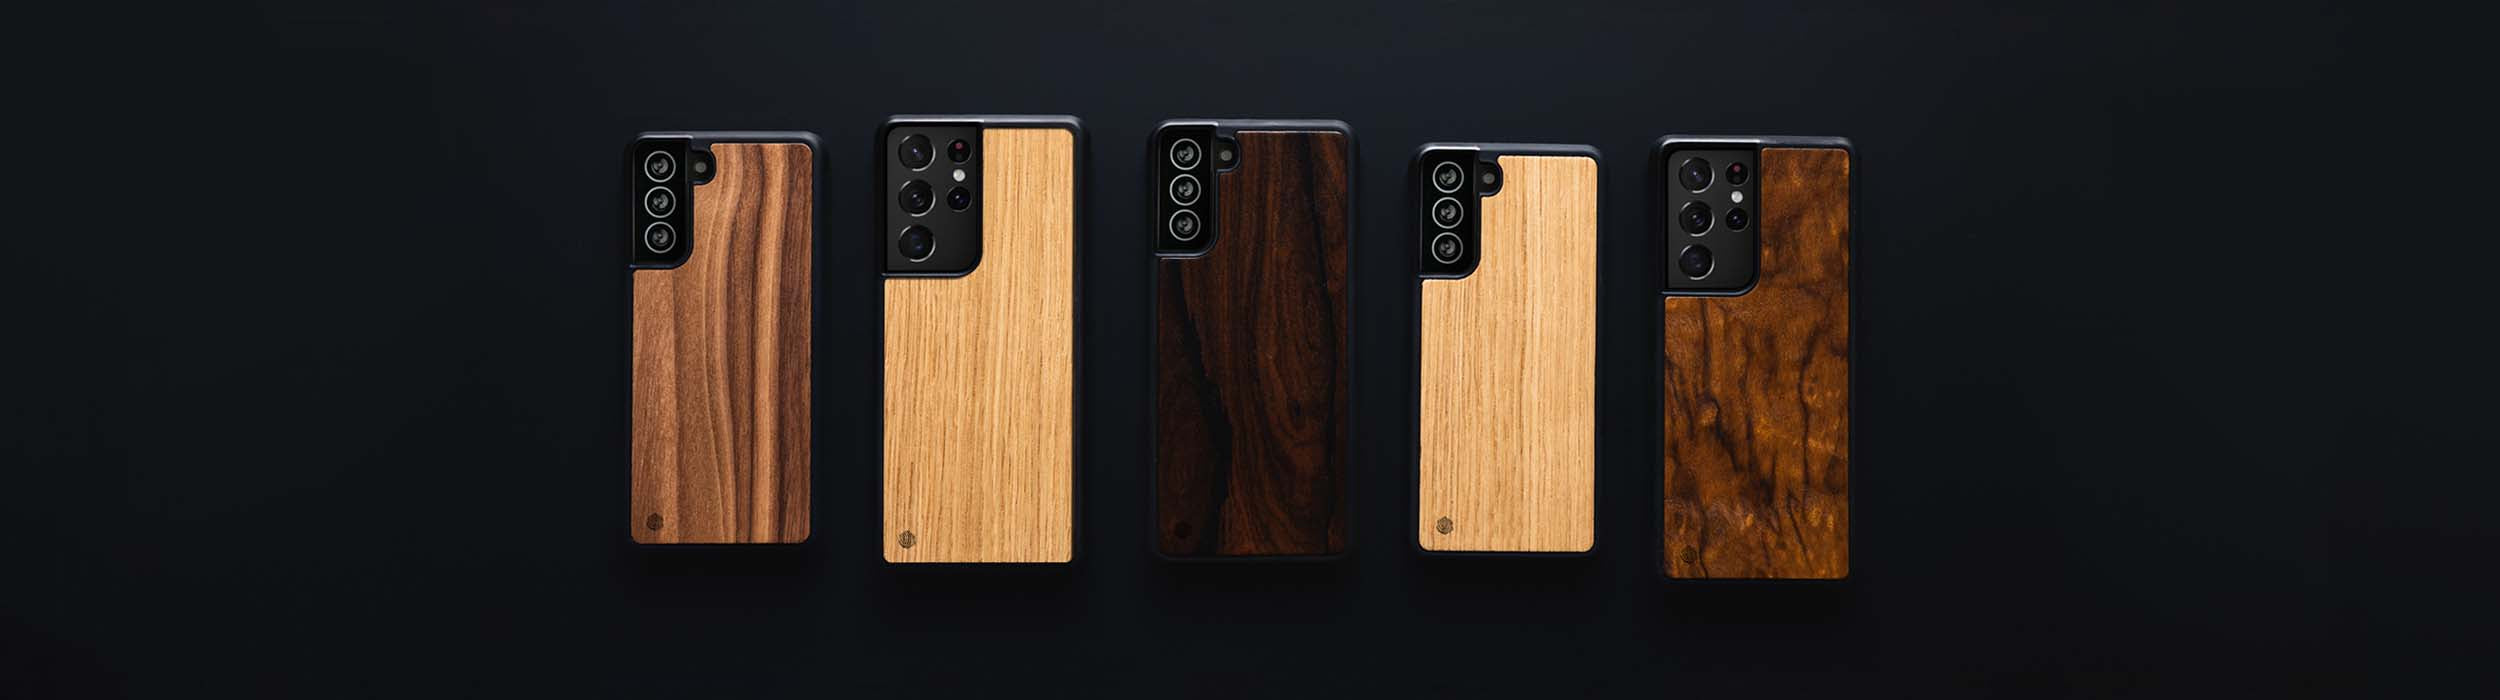 Samsung Galaxy S20 PLUS Wooden Phone Cases